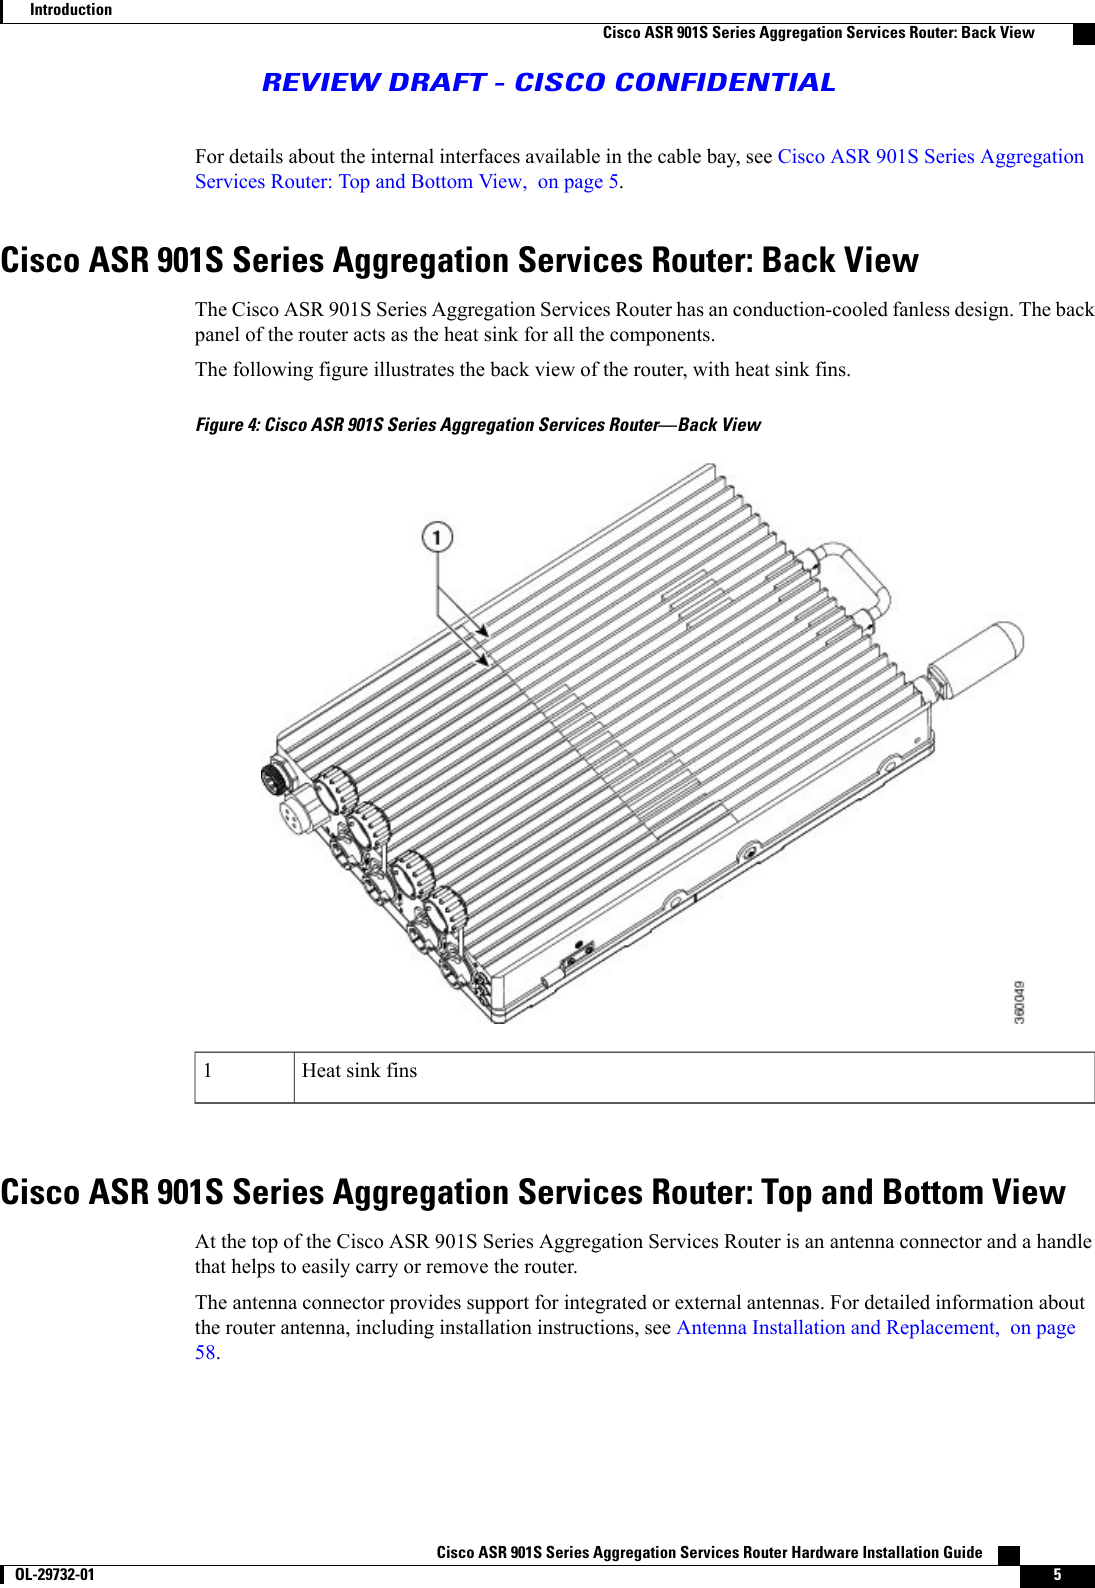 For details about the internal interfaces available in the cable bay, see Cisco ASR 901S Series AggregationServices Router: Top and Bottom View, on page 5.Cisco ASR 901S Series Aggregation Services Router: Back ViewThe Cisco ASR 901S Series Aggregation Services Router has an conduction-cooled fanless design. The backpanel of the router acts as the heat sink for all the components.The following figure illustrates the back view of the router, with heat sink fins.Figure 4: Cisco ASR 901S Series Aggregation Services Router—Back ViewHeat sink fins1Cisco ASR 901S Series Aggregation Services Router: Top and Bottom ViewAt the top of the Cisco ASR 901S Series Aggregation Services Router is an antenna connector and a handlethat helps to easily carry or remove the router.The antenna connector provides support for integrated or external antennas. For detailed information aboutthe router antenna, including installation instructions, see Antenna Installation and Replacement, on page58.Cisco ASR 901S Series Aggregation Services Router Hardware Installation Guide       OL-29732-01 5IntroductionCisco ASR 901S Series Aggregation Services Router: Back ViewREVIEW DRAFT - CISCO CONFIDENTIAL